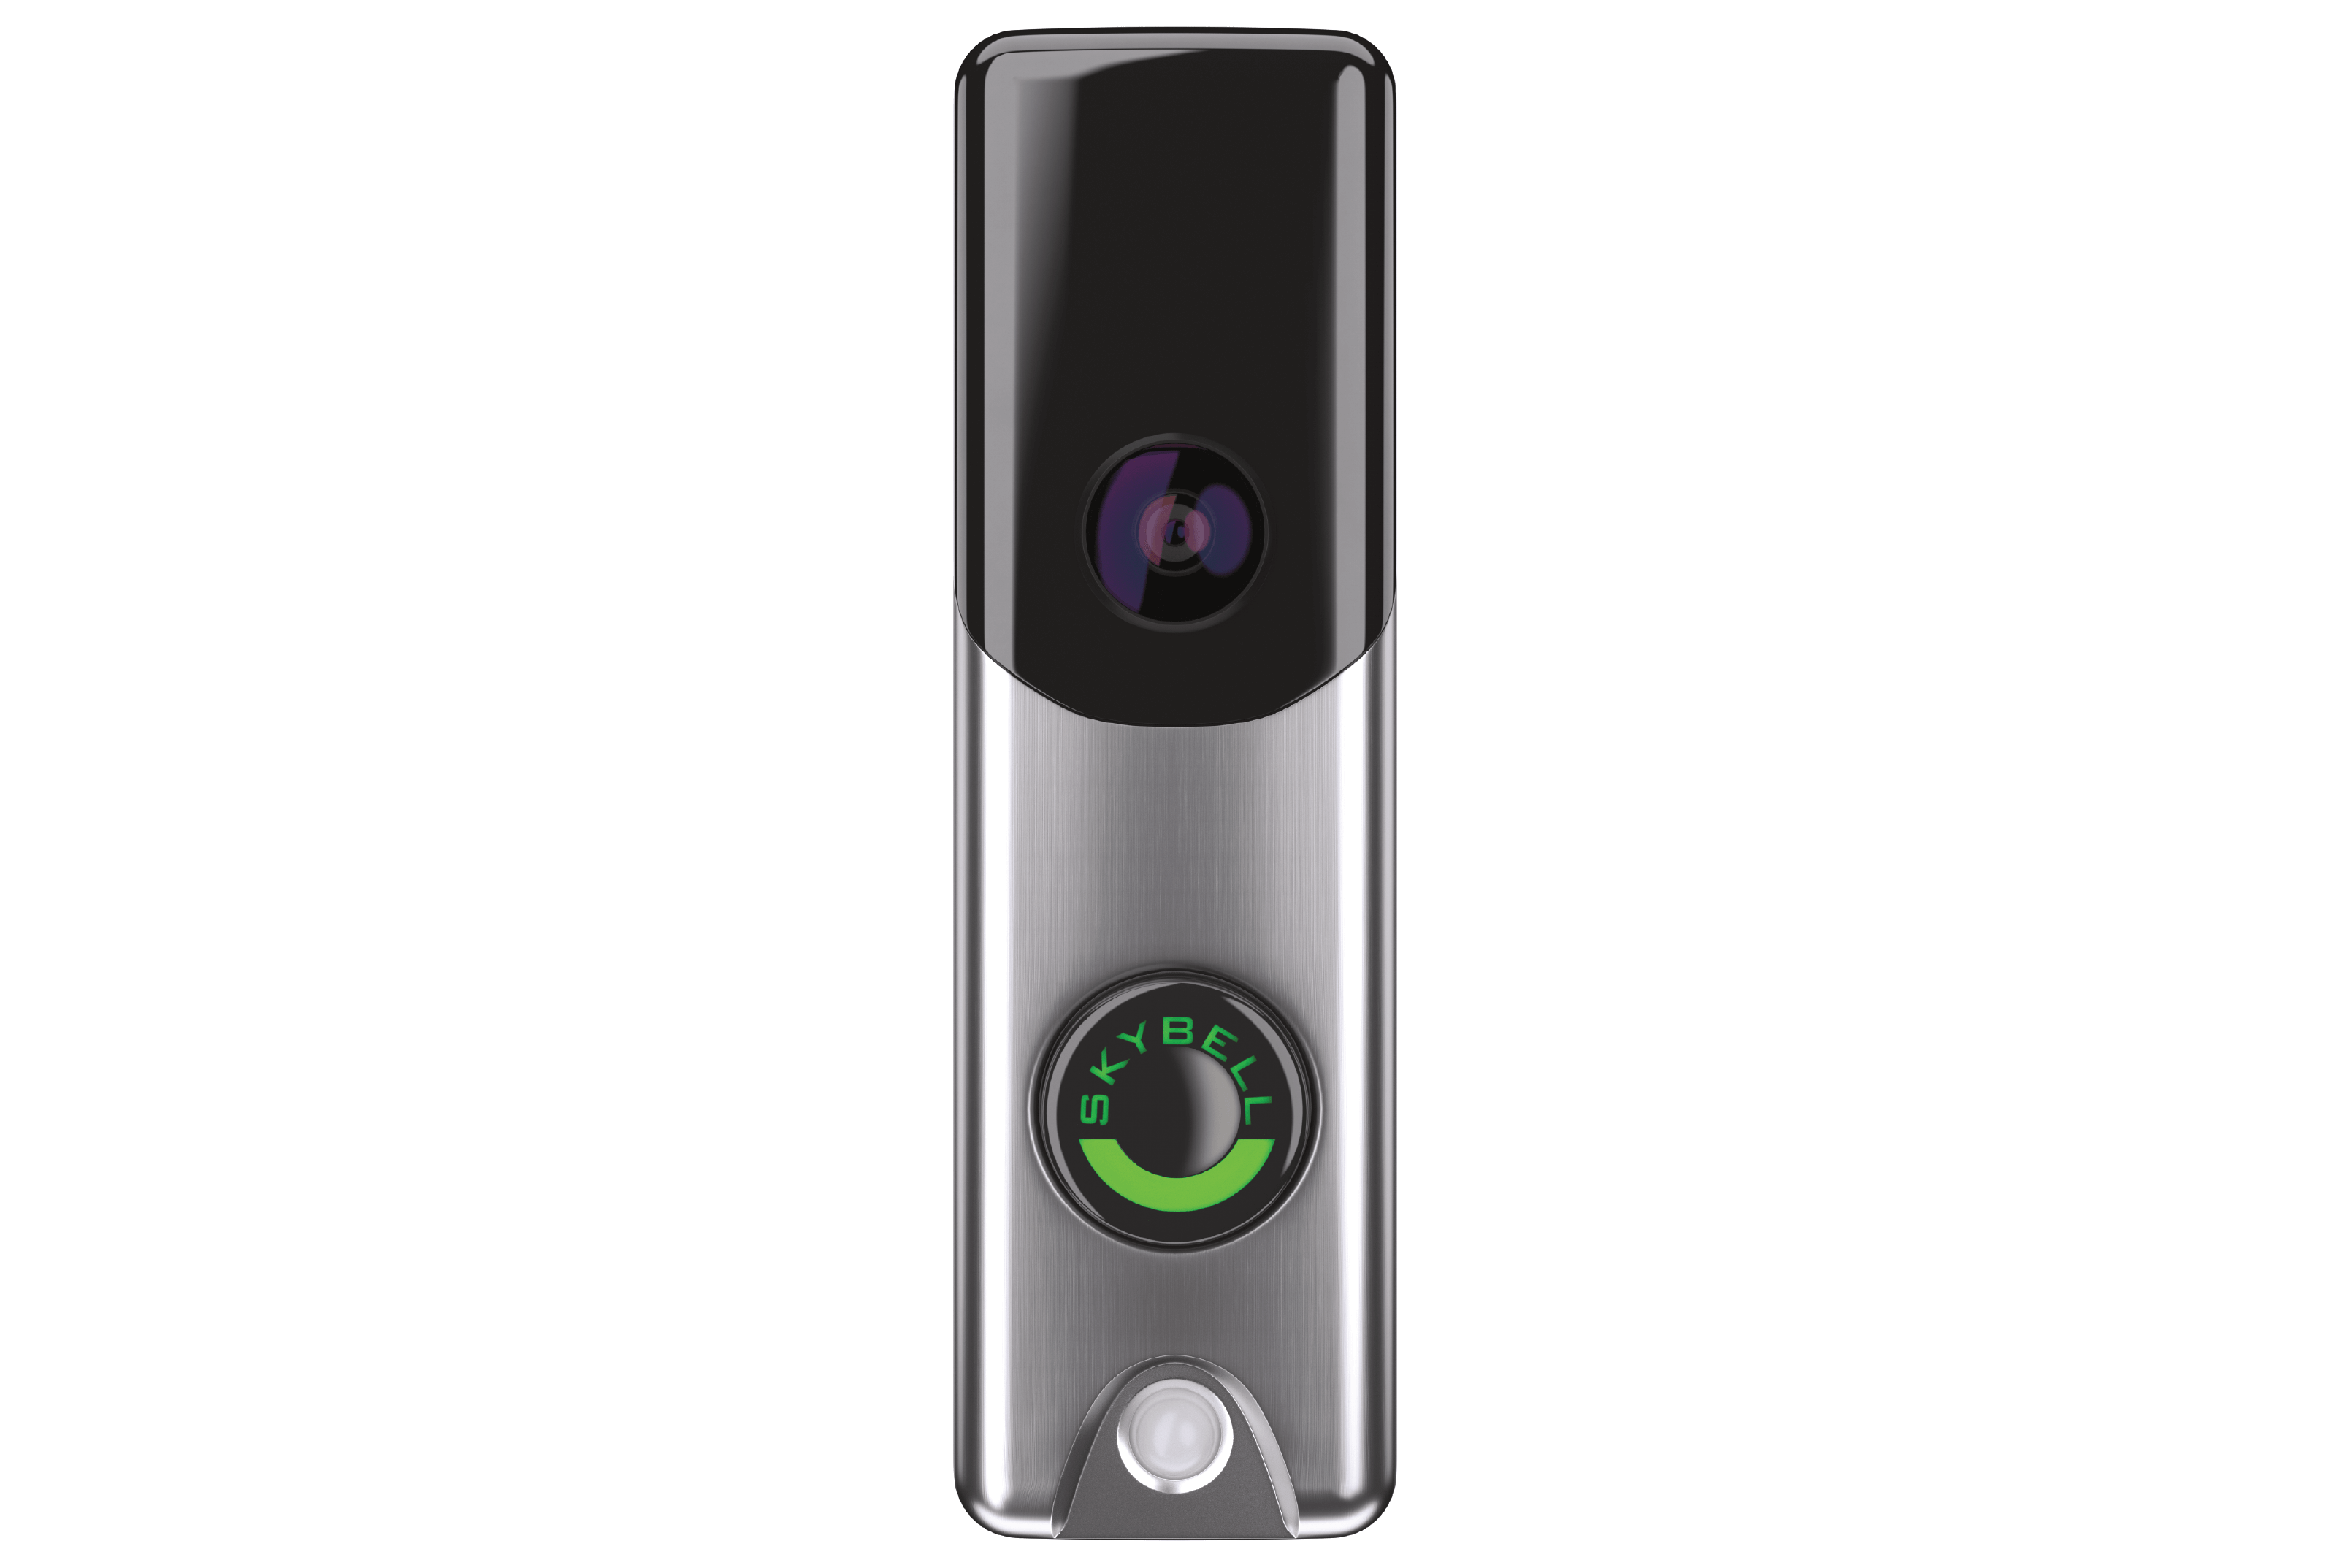 PC Security Systems, Inc video doorbell